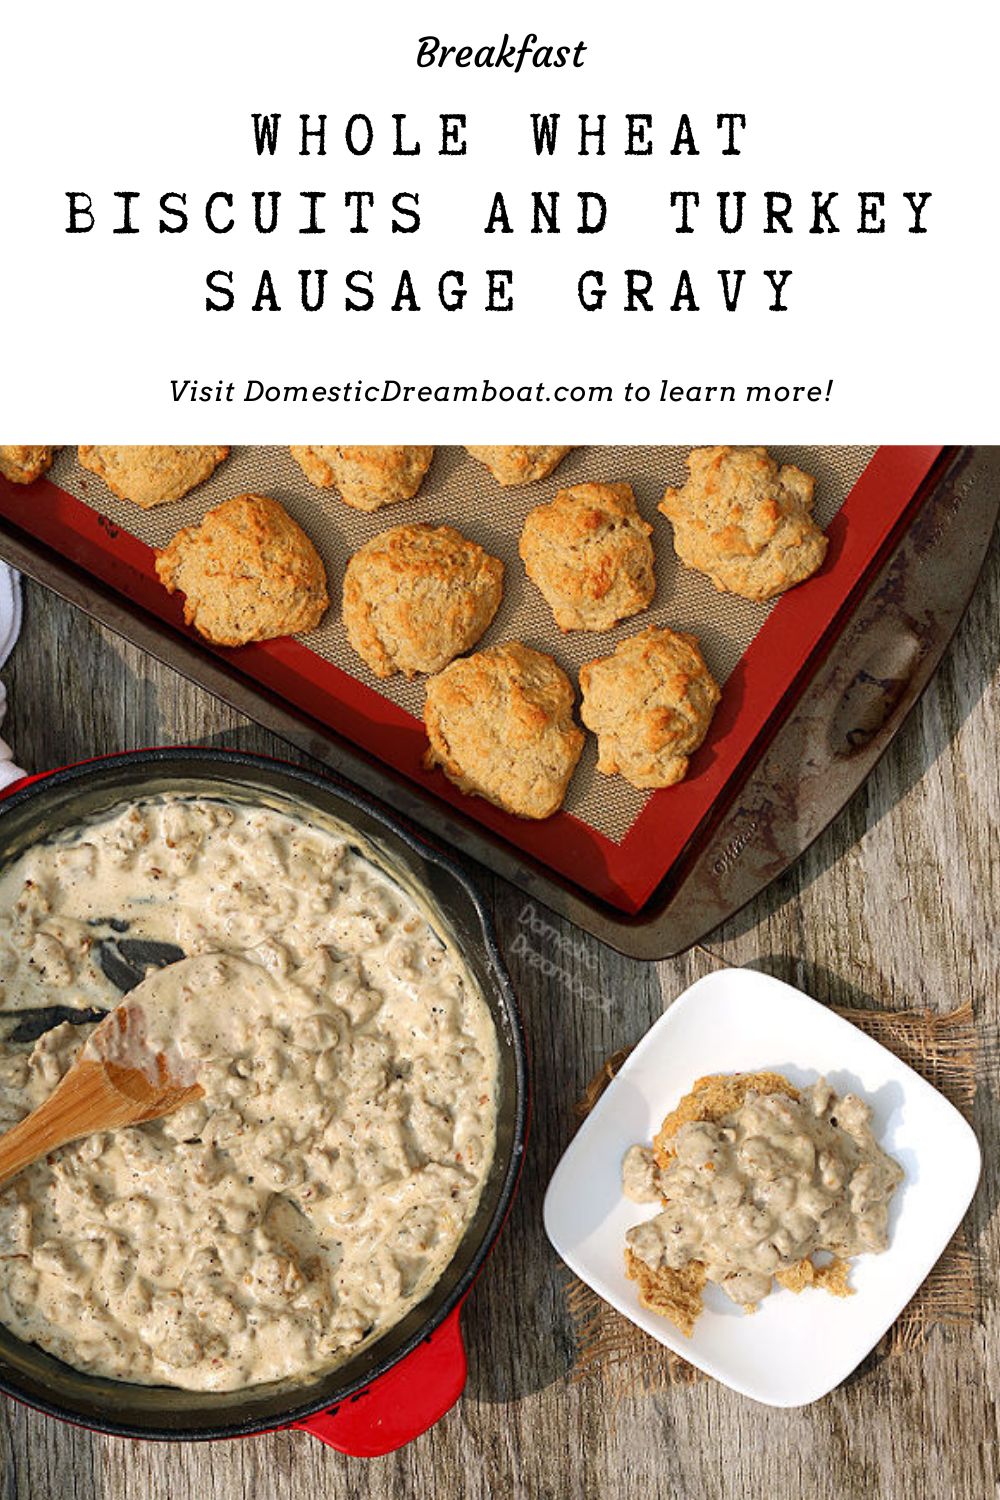 Overhead photo of whole wheat biscuits and turkey sausage gravy